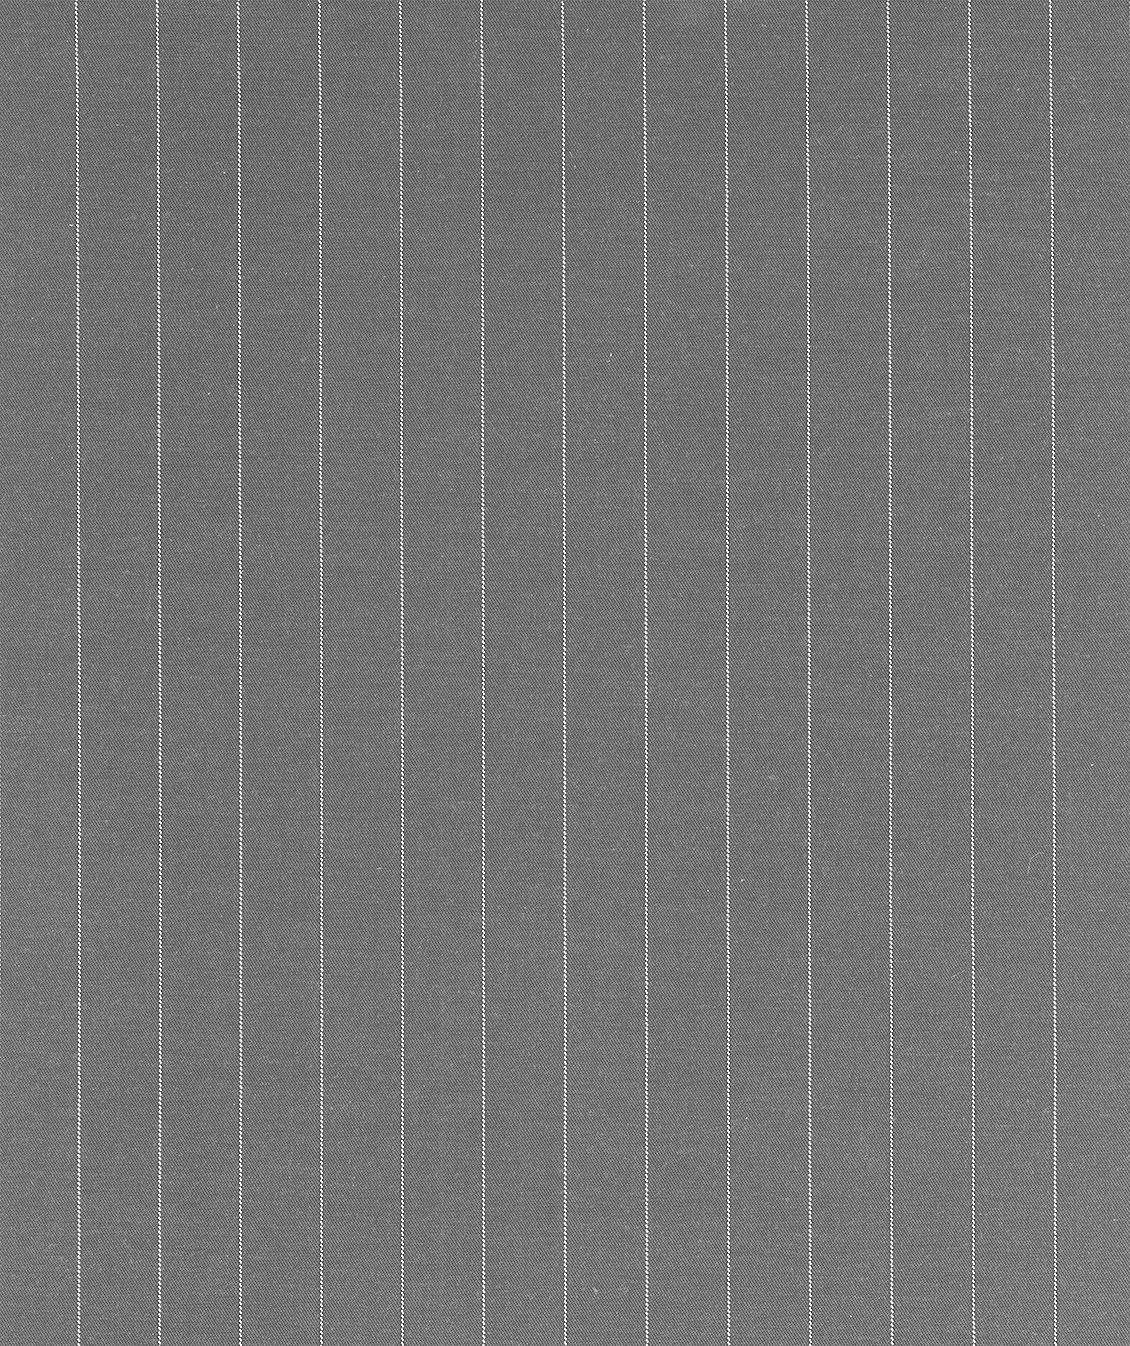 Pinstriped fabric wallpaper, vertical white lines on a grey background